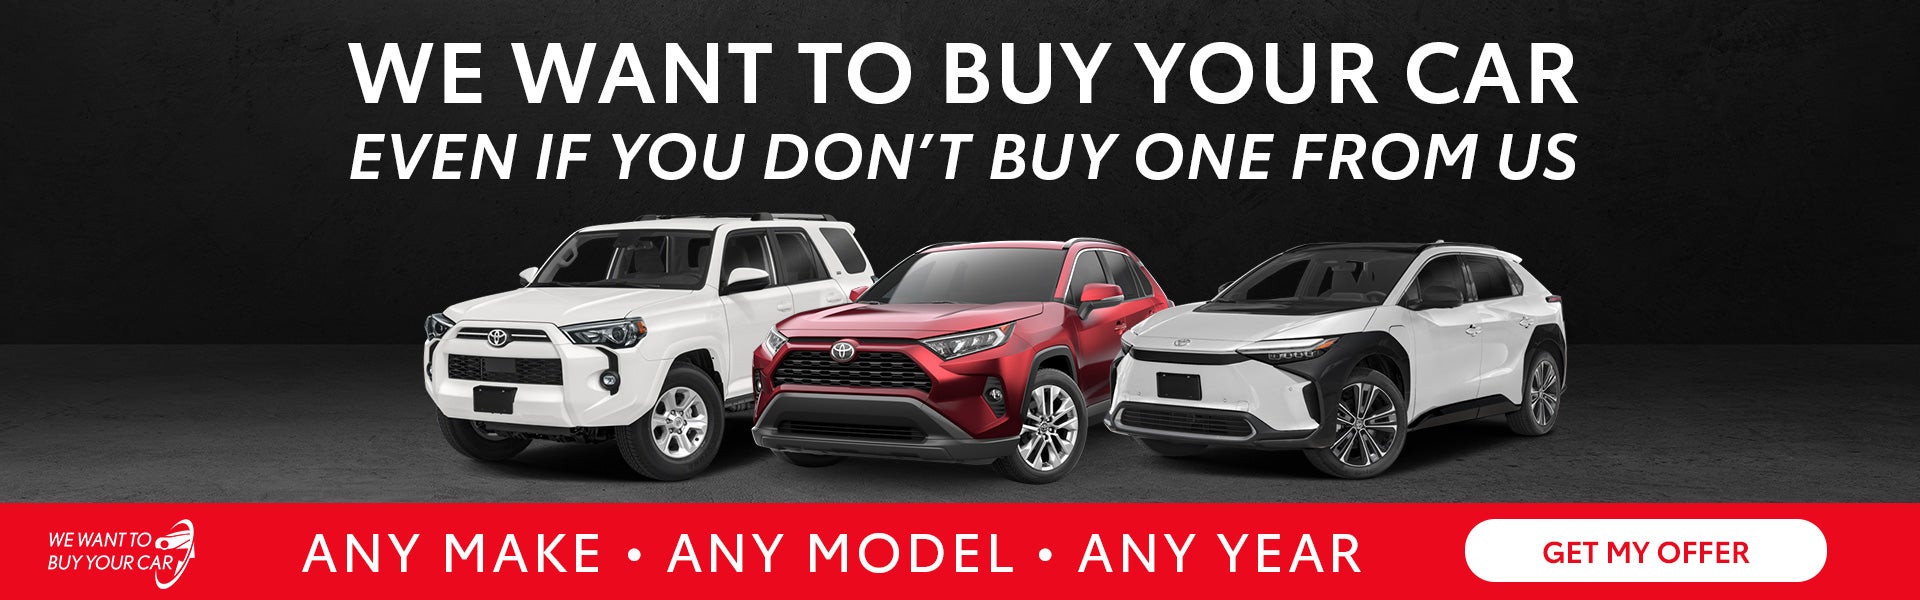 We want to buy your car